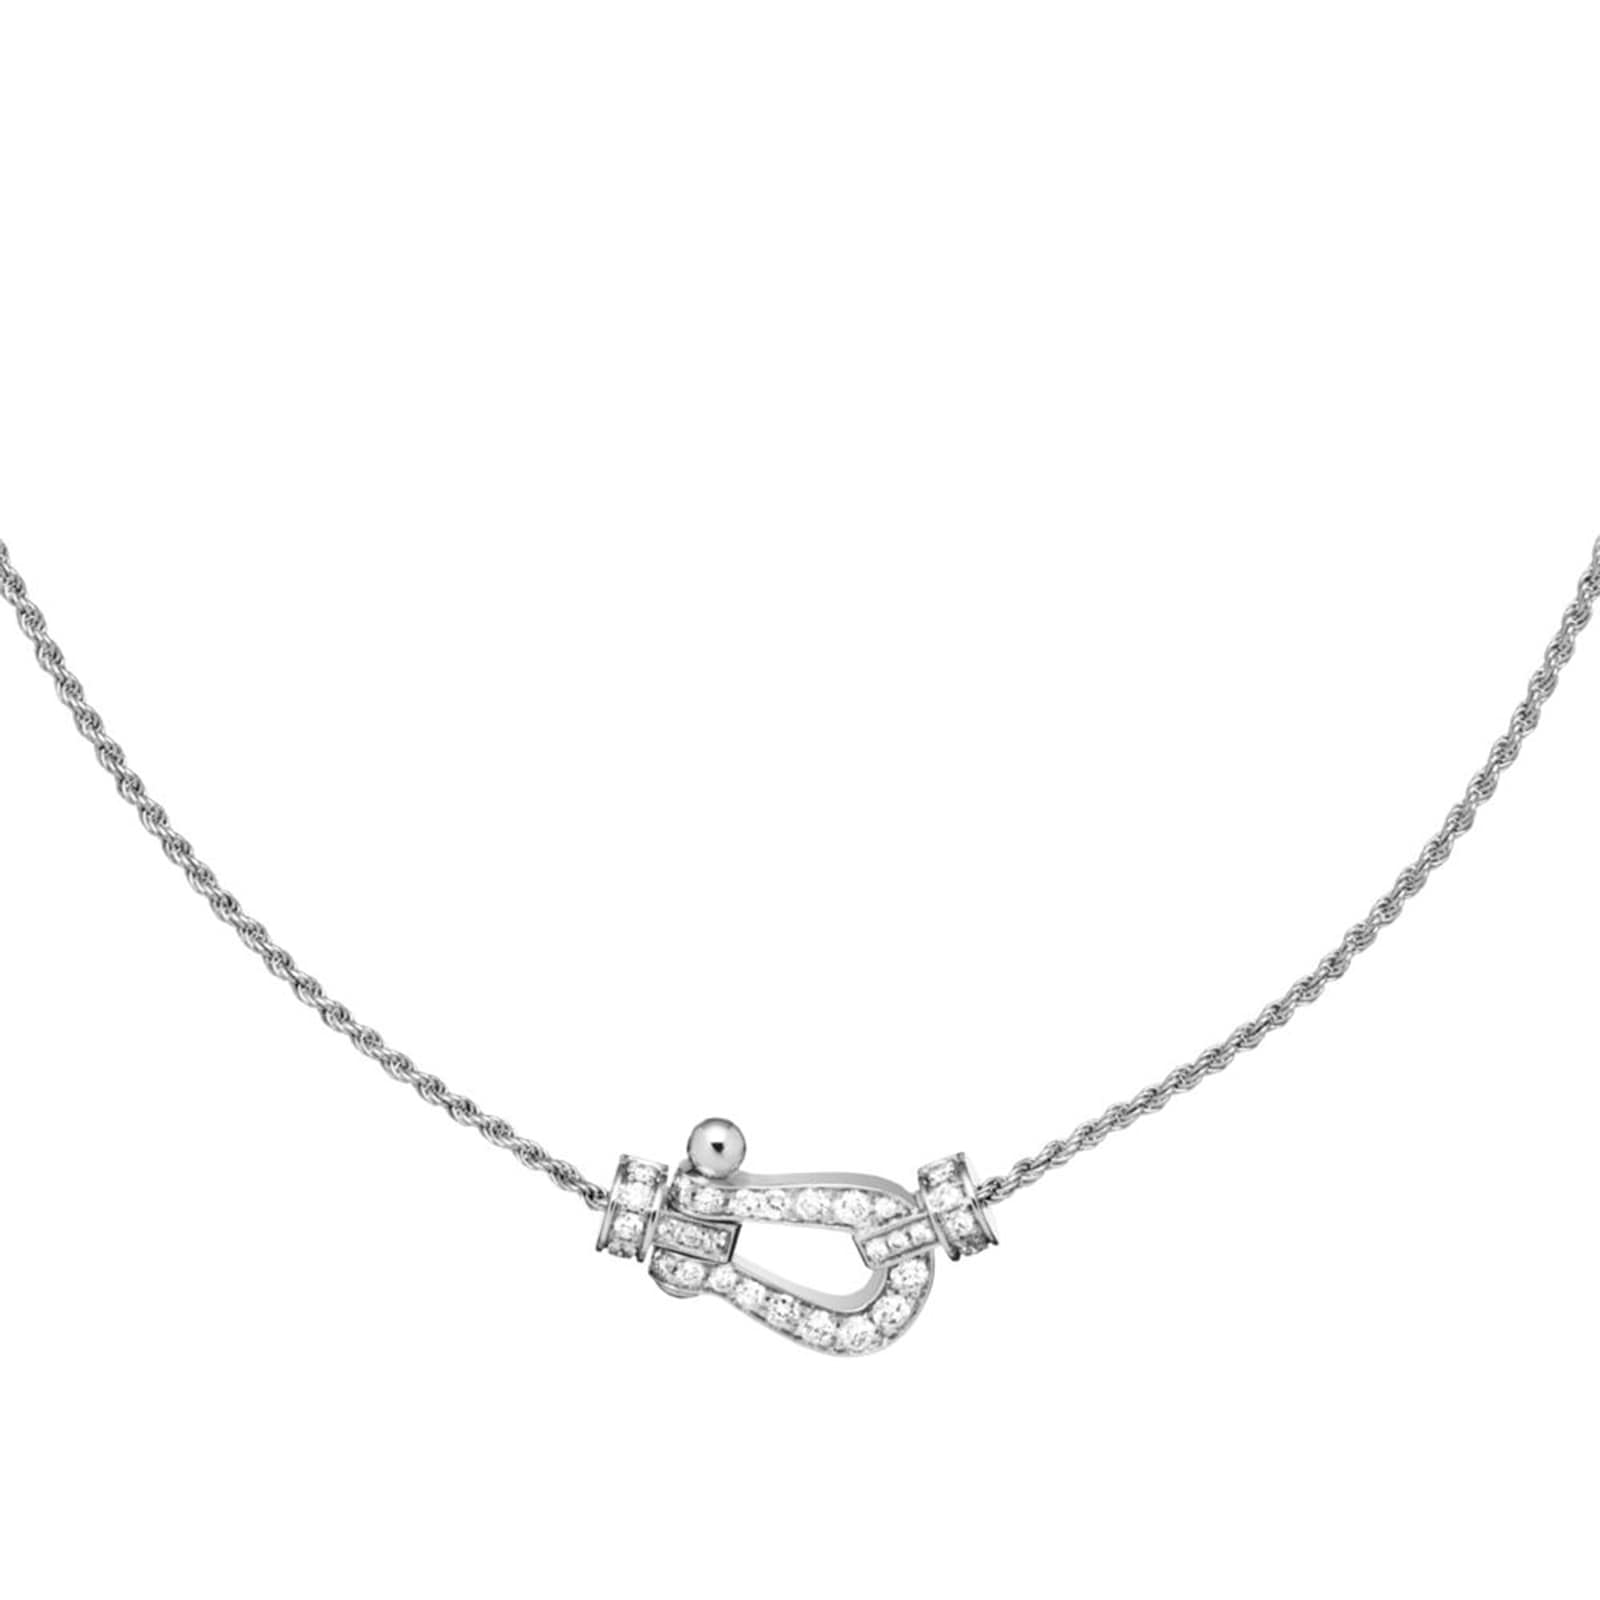 Force 10 18ct White Gold 0.36ct Diamond Necklace